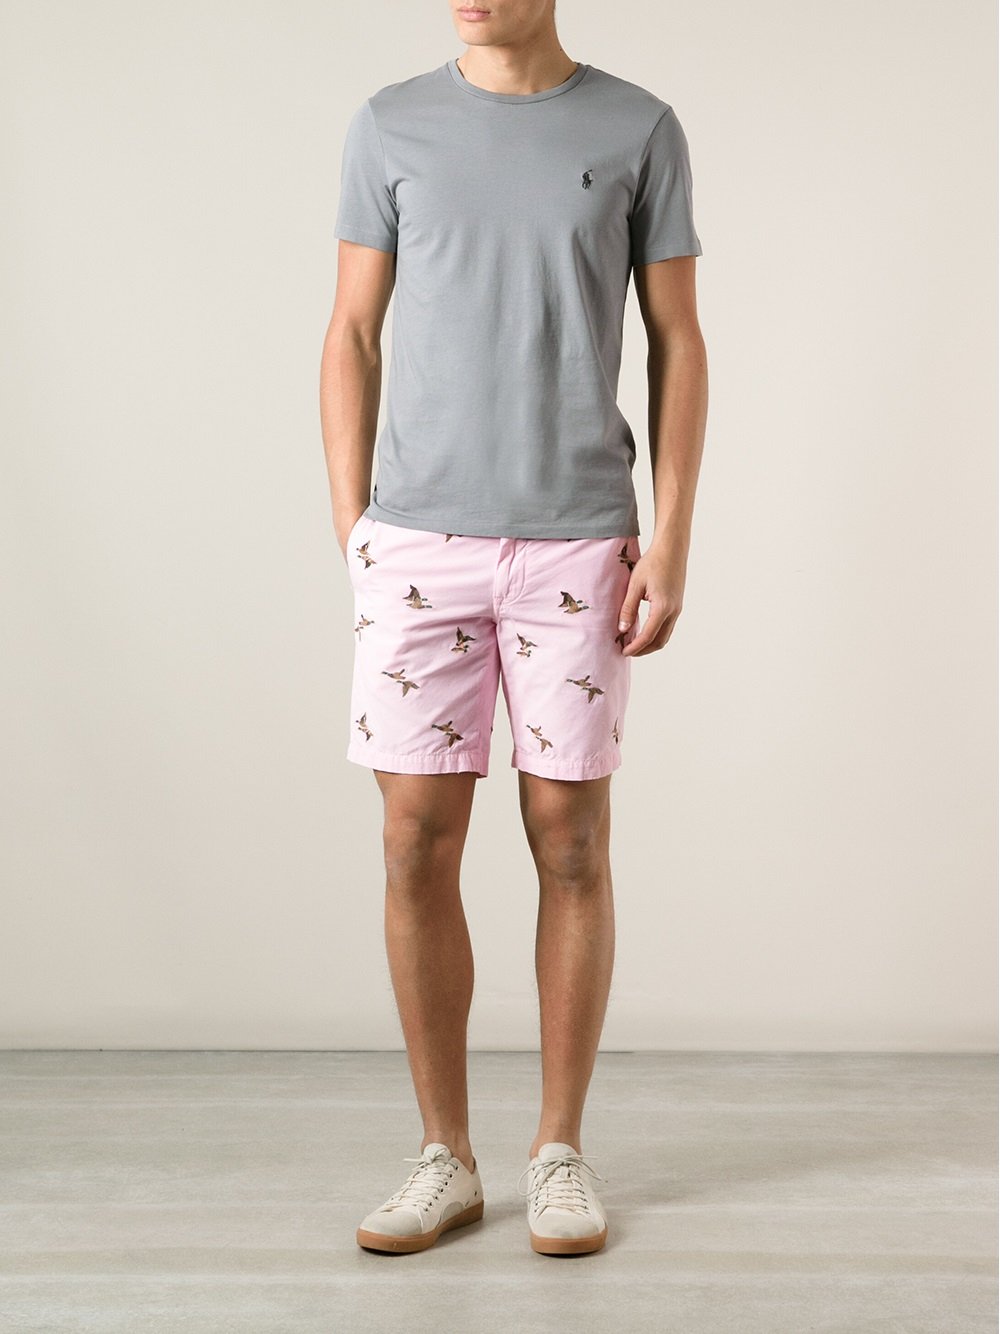 Lyst - Polo Ralph Lauren Greenwich Embroidered Duck Shorts in Pink for Men